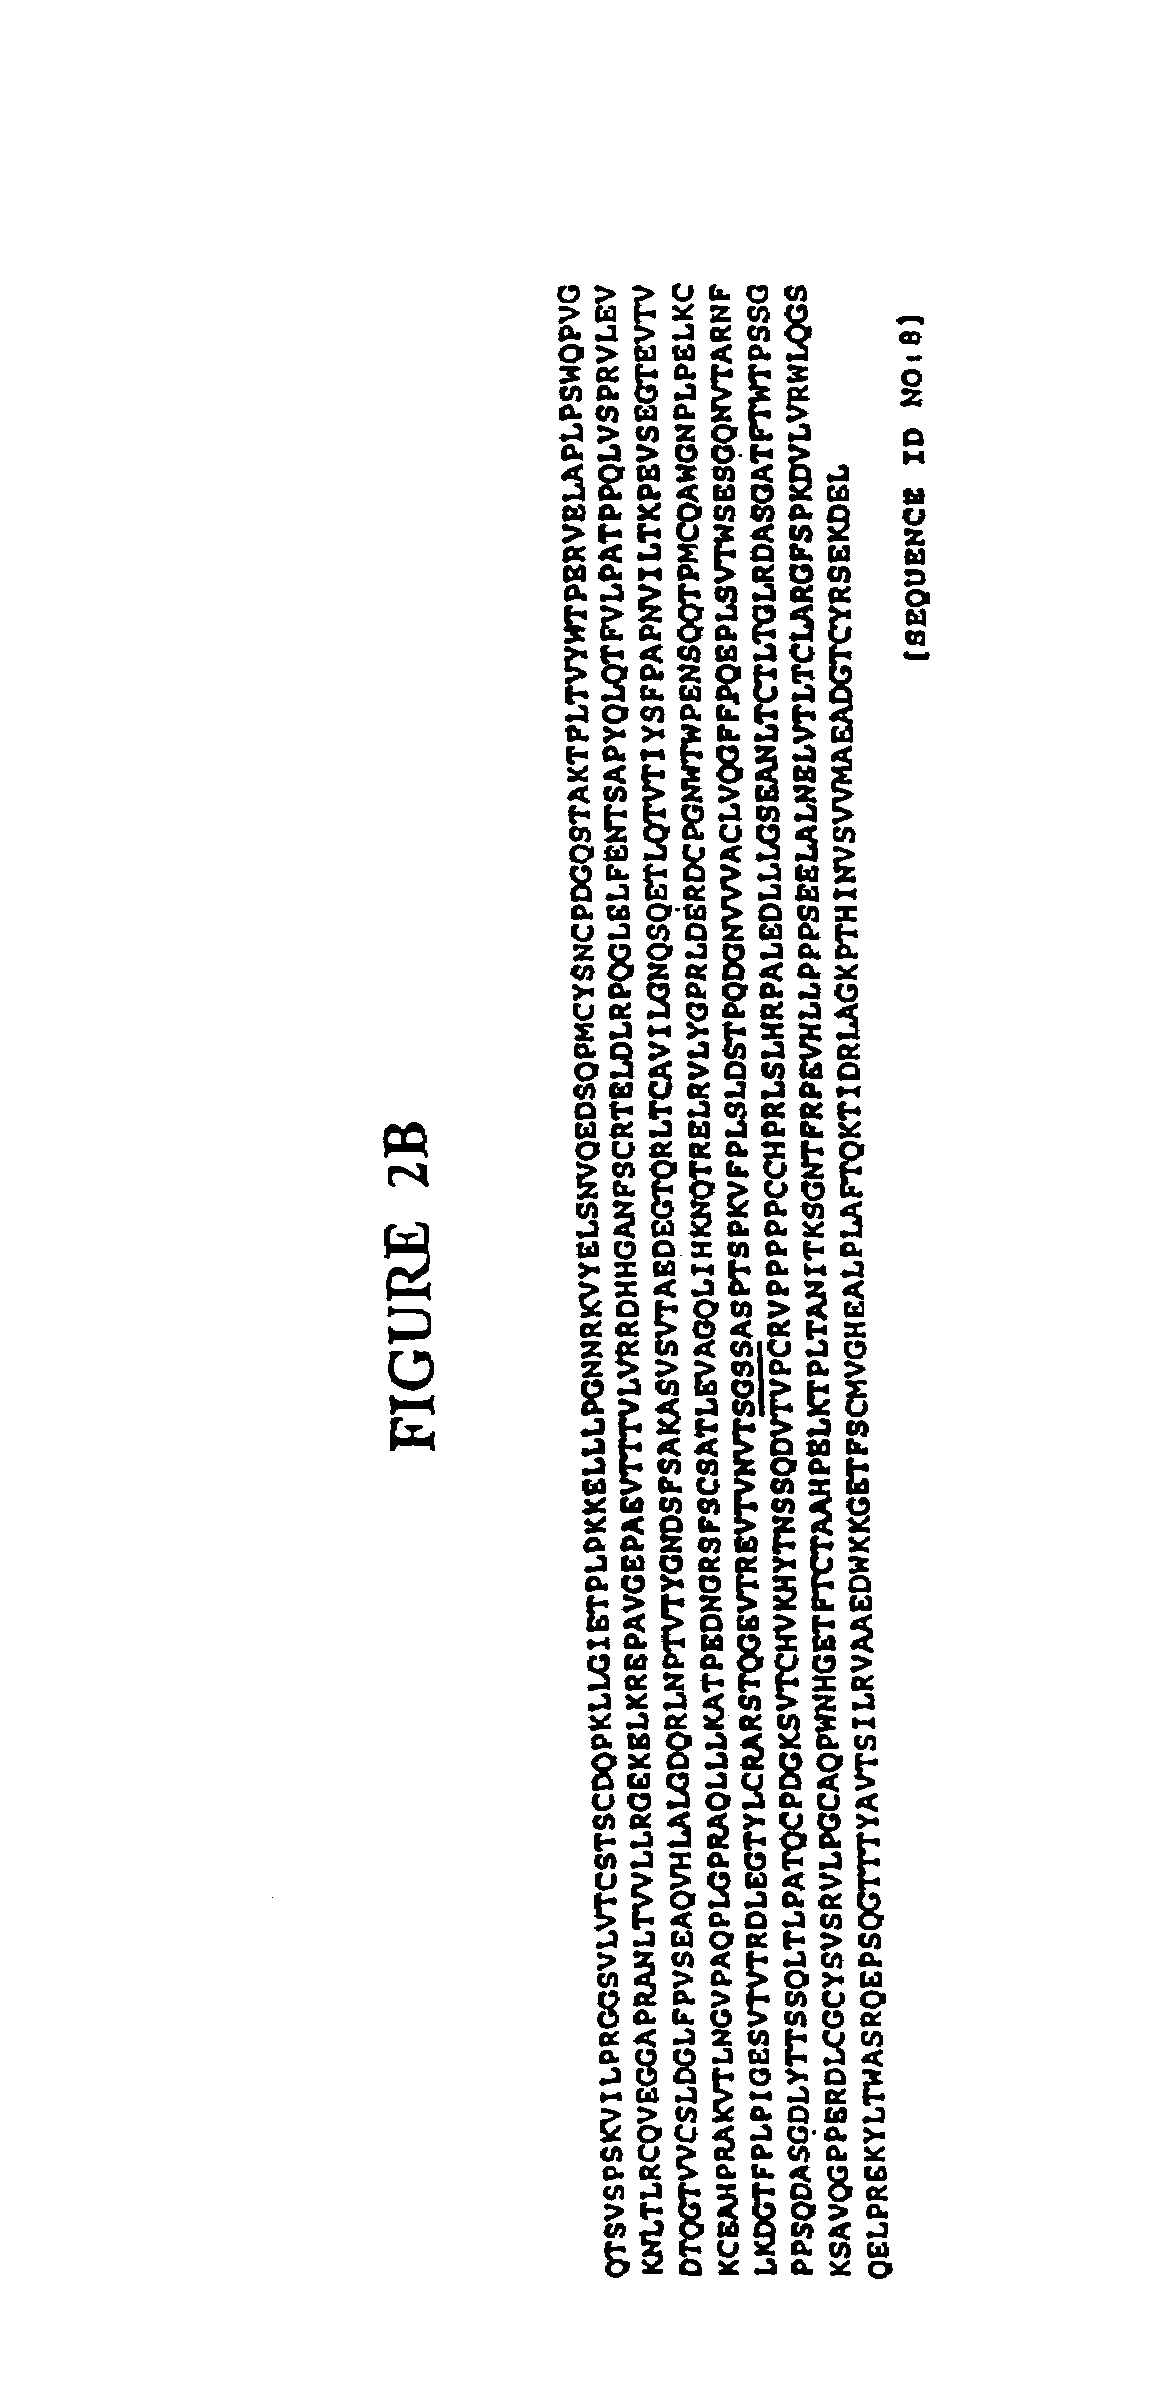 Immunoadhesin comprising a chimeric ICAM-1 molecule produced in a plant